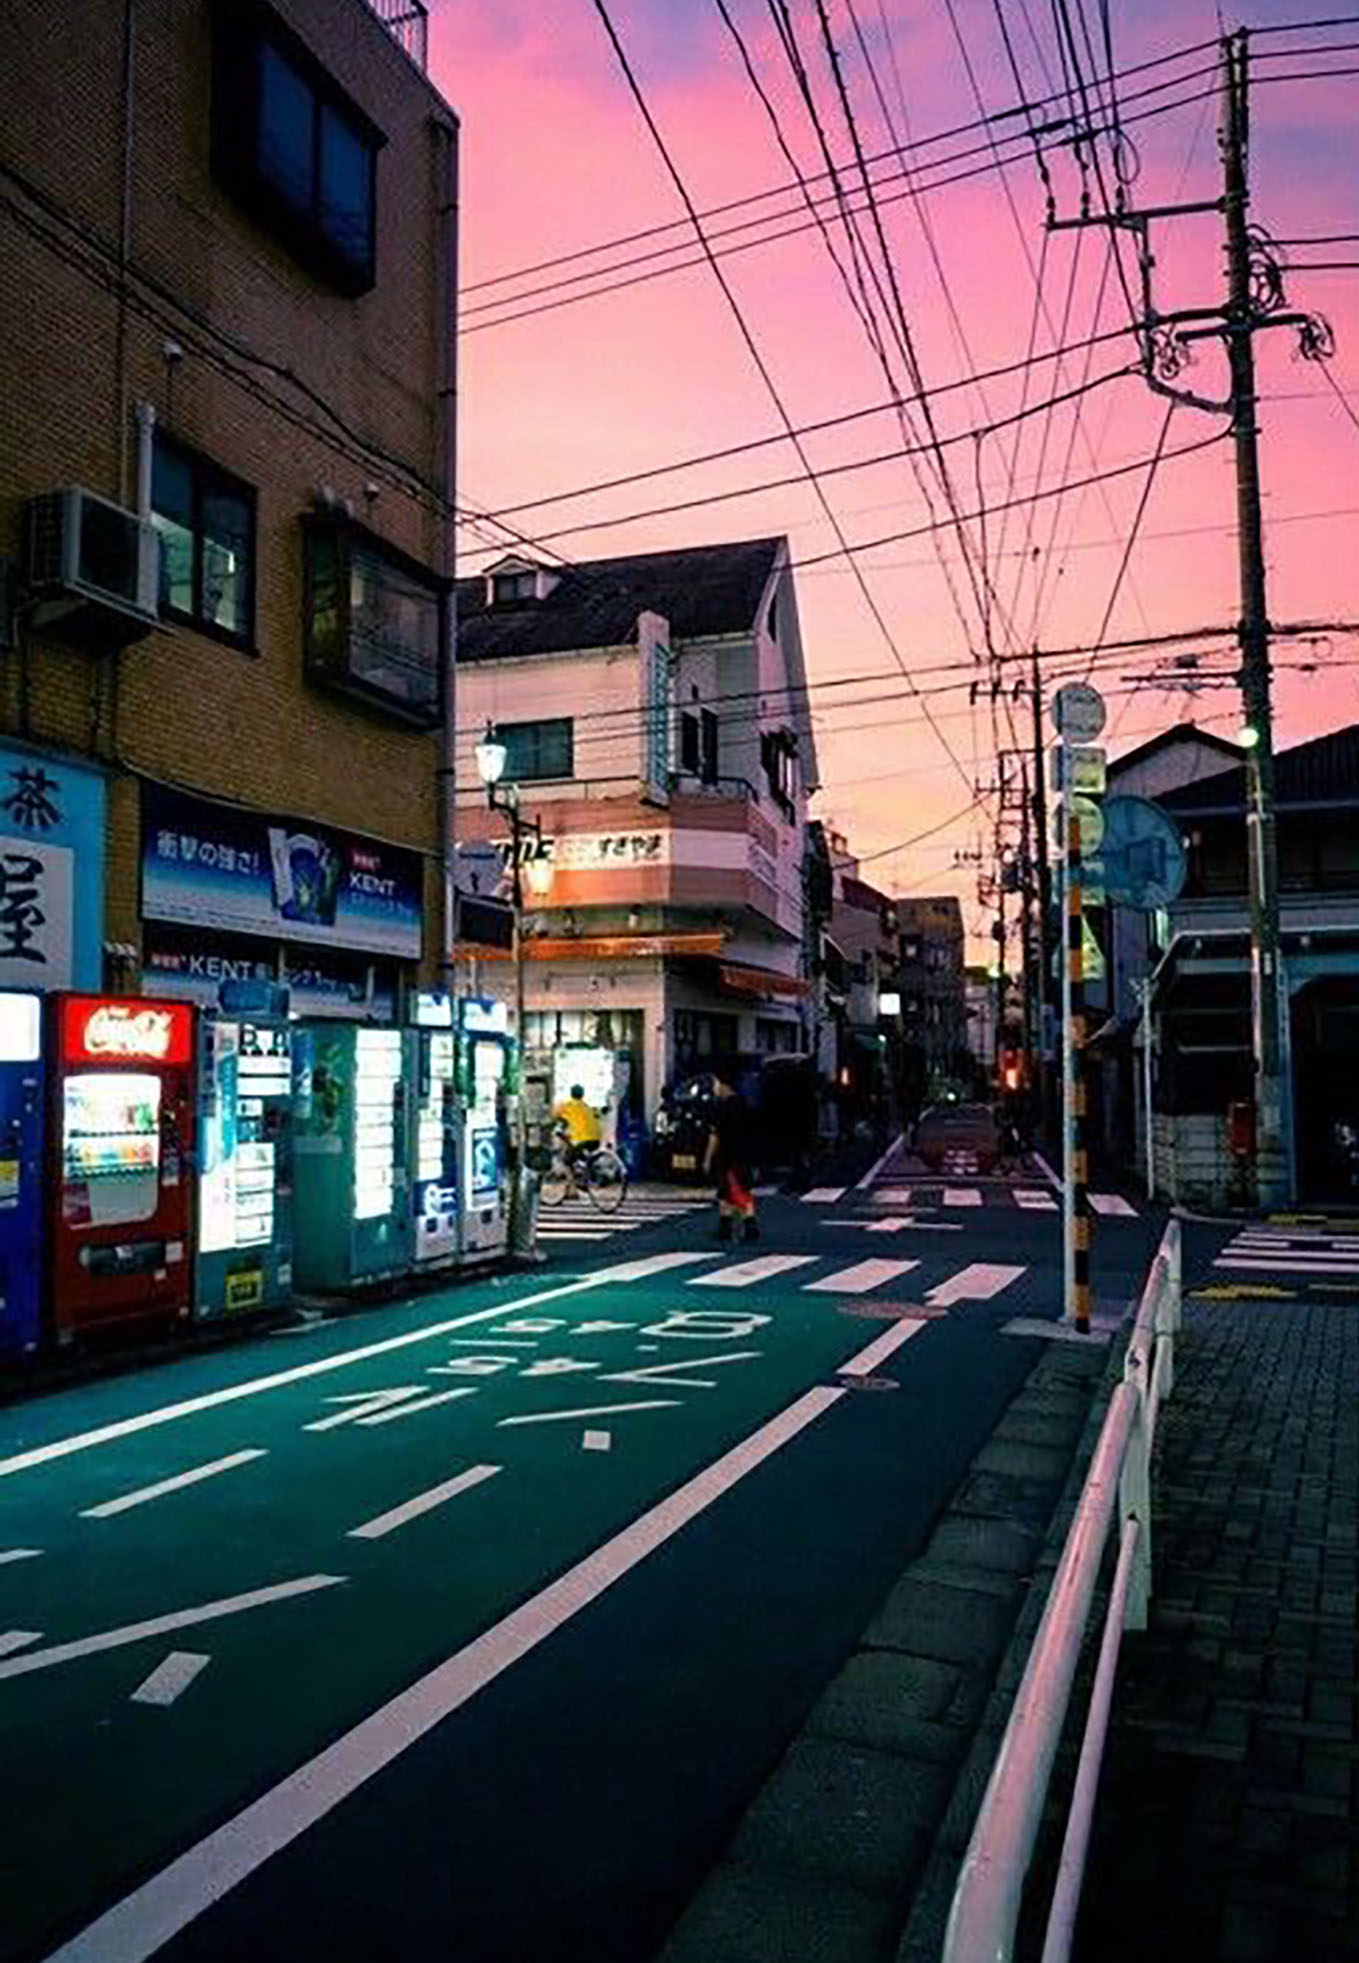 A Japanese street with a pink sky in the background showing one car lane, a bike lane, and sidewalk.